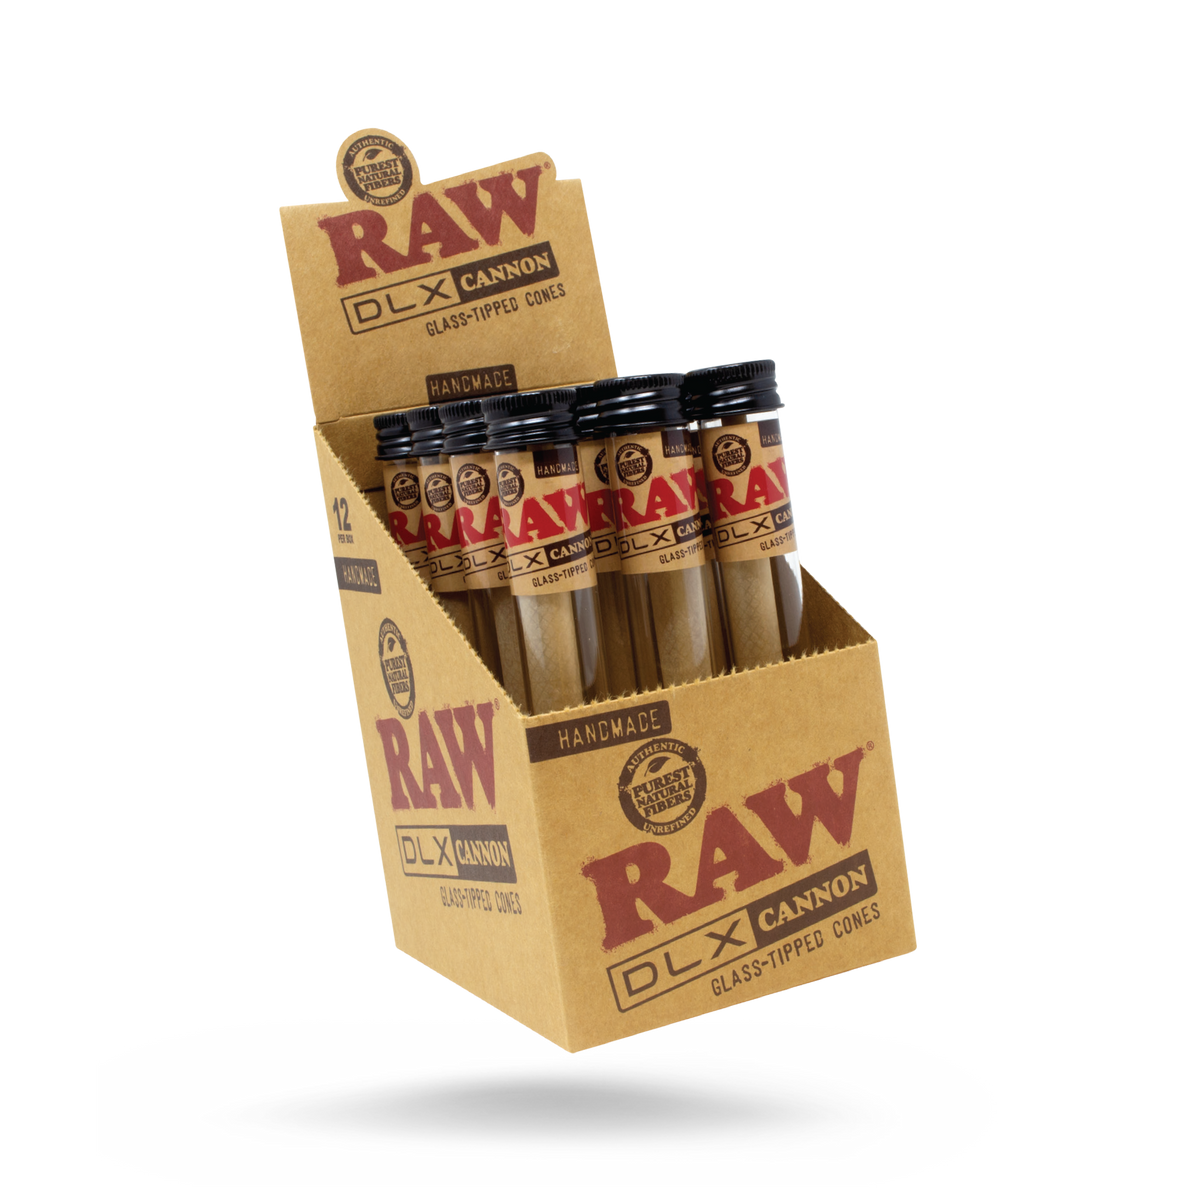 RAW DLX Glass Tipped Cone | Cannon RAW Cones RAWB-CAAA-DX01 esd-official